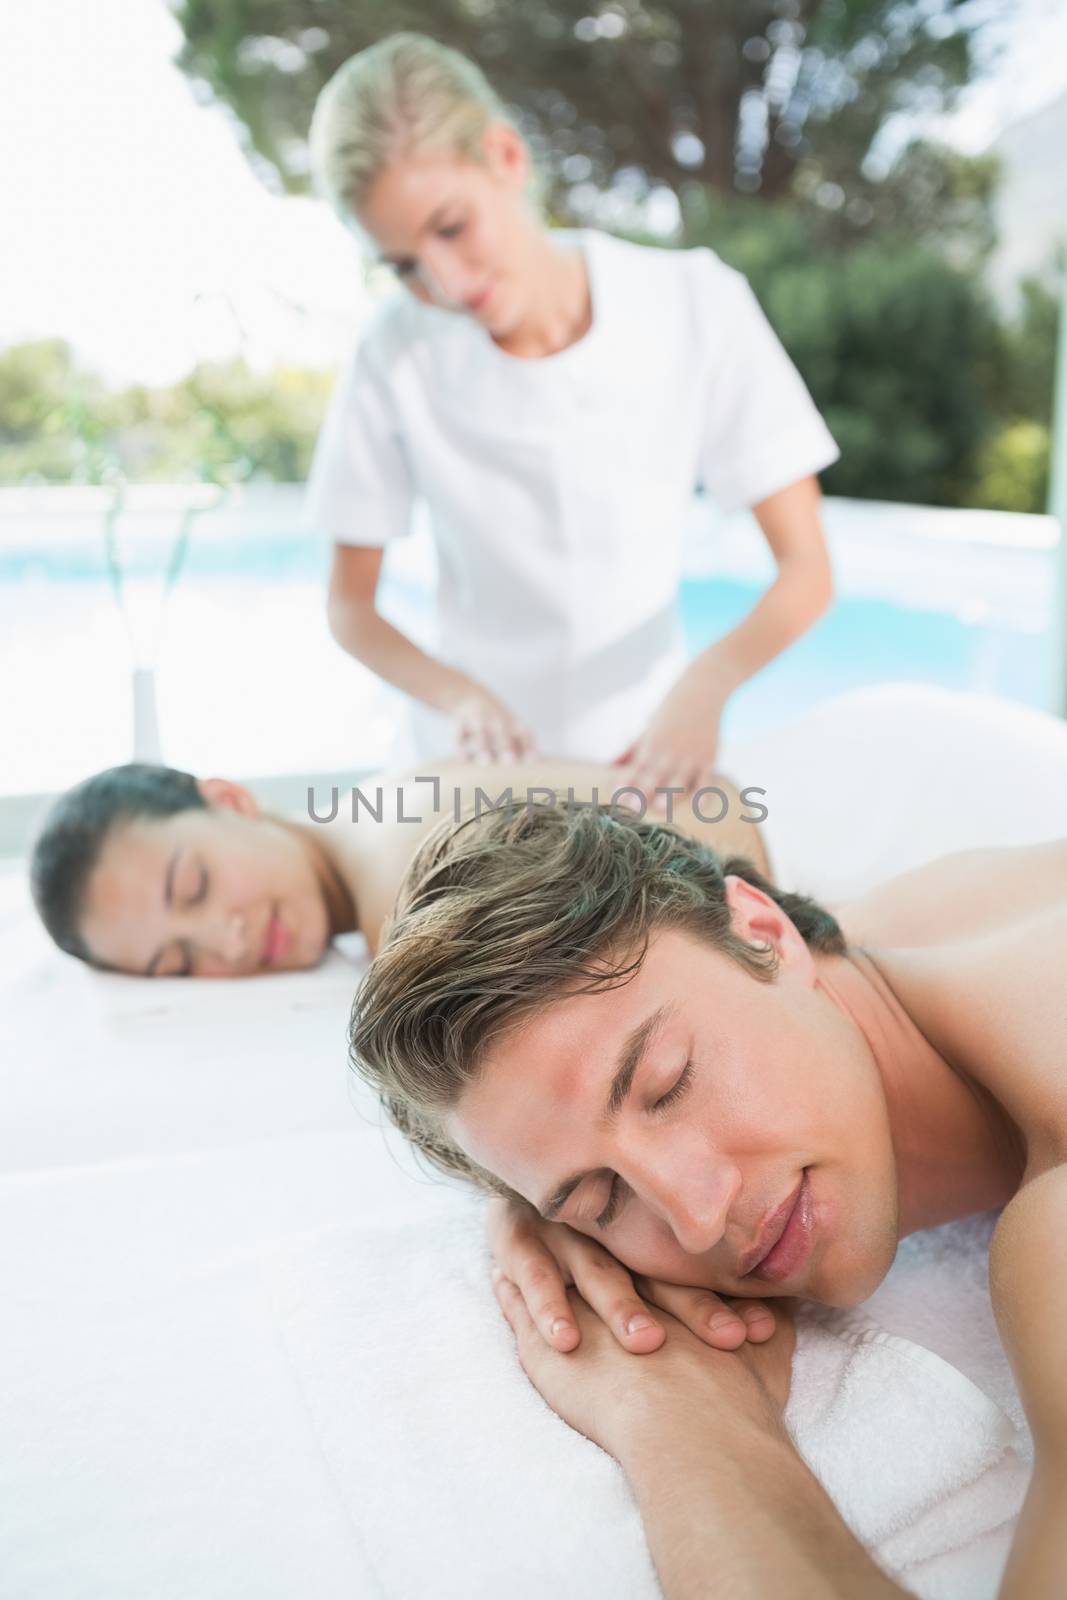 Side view of a young couple enjoying massage at health farm